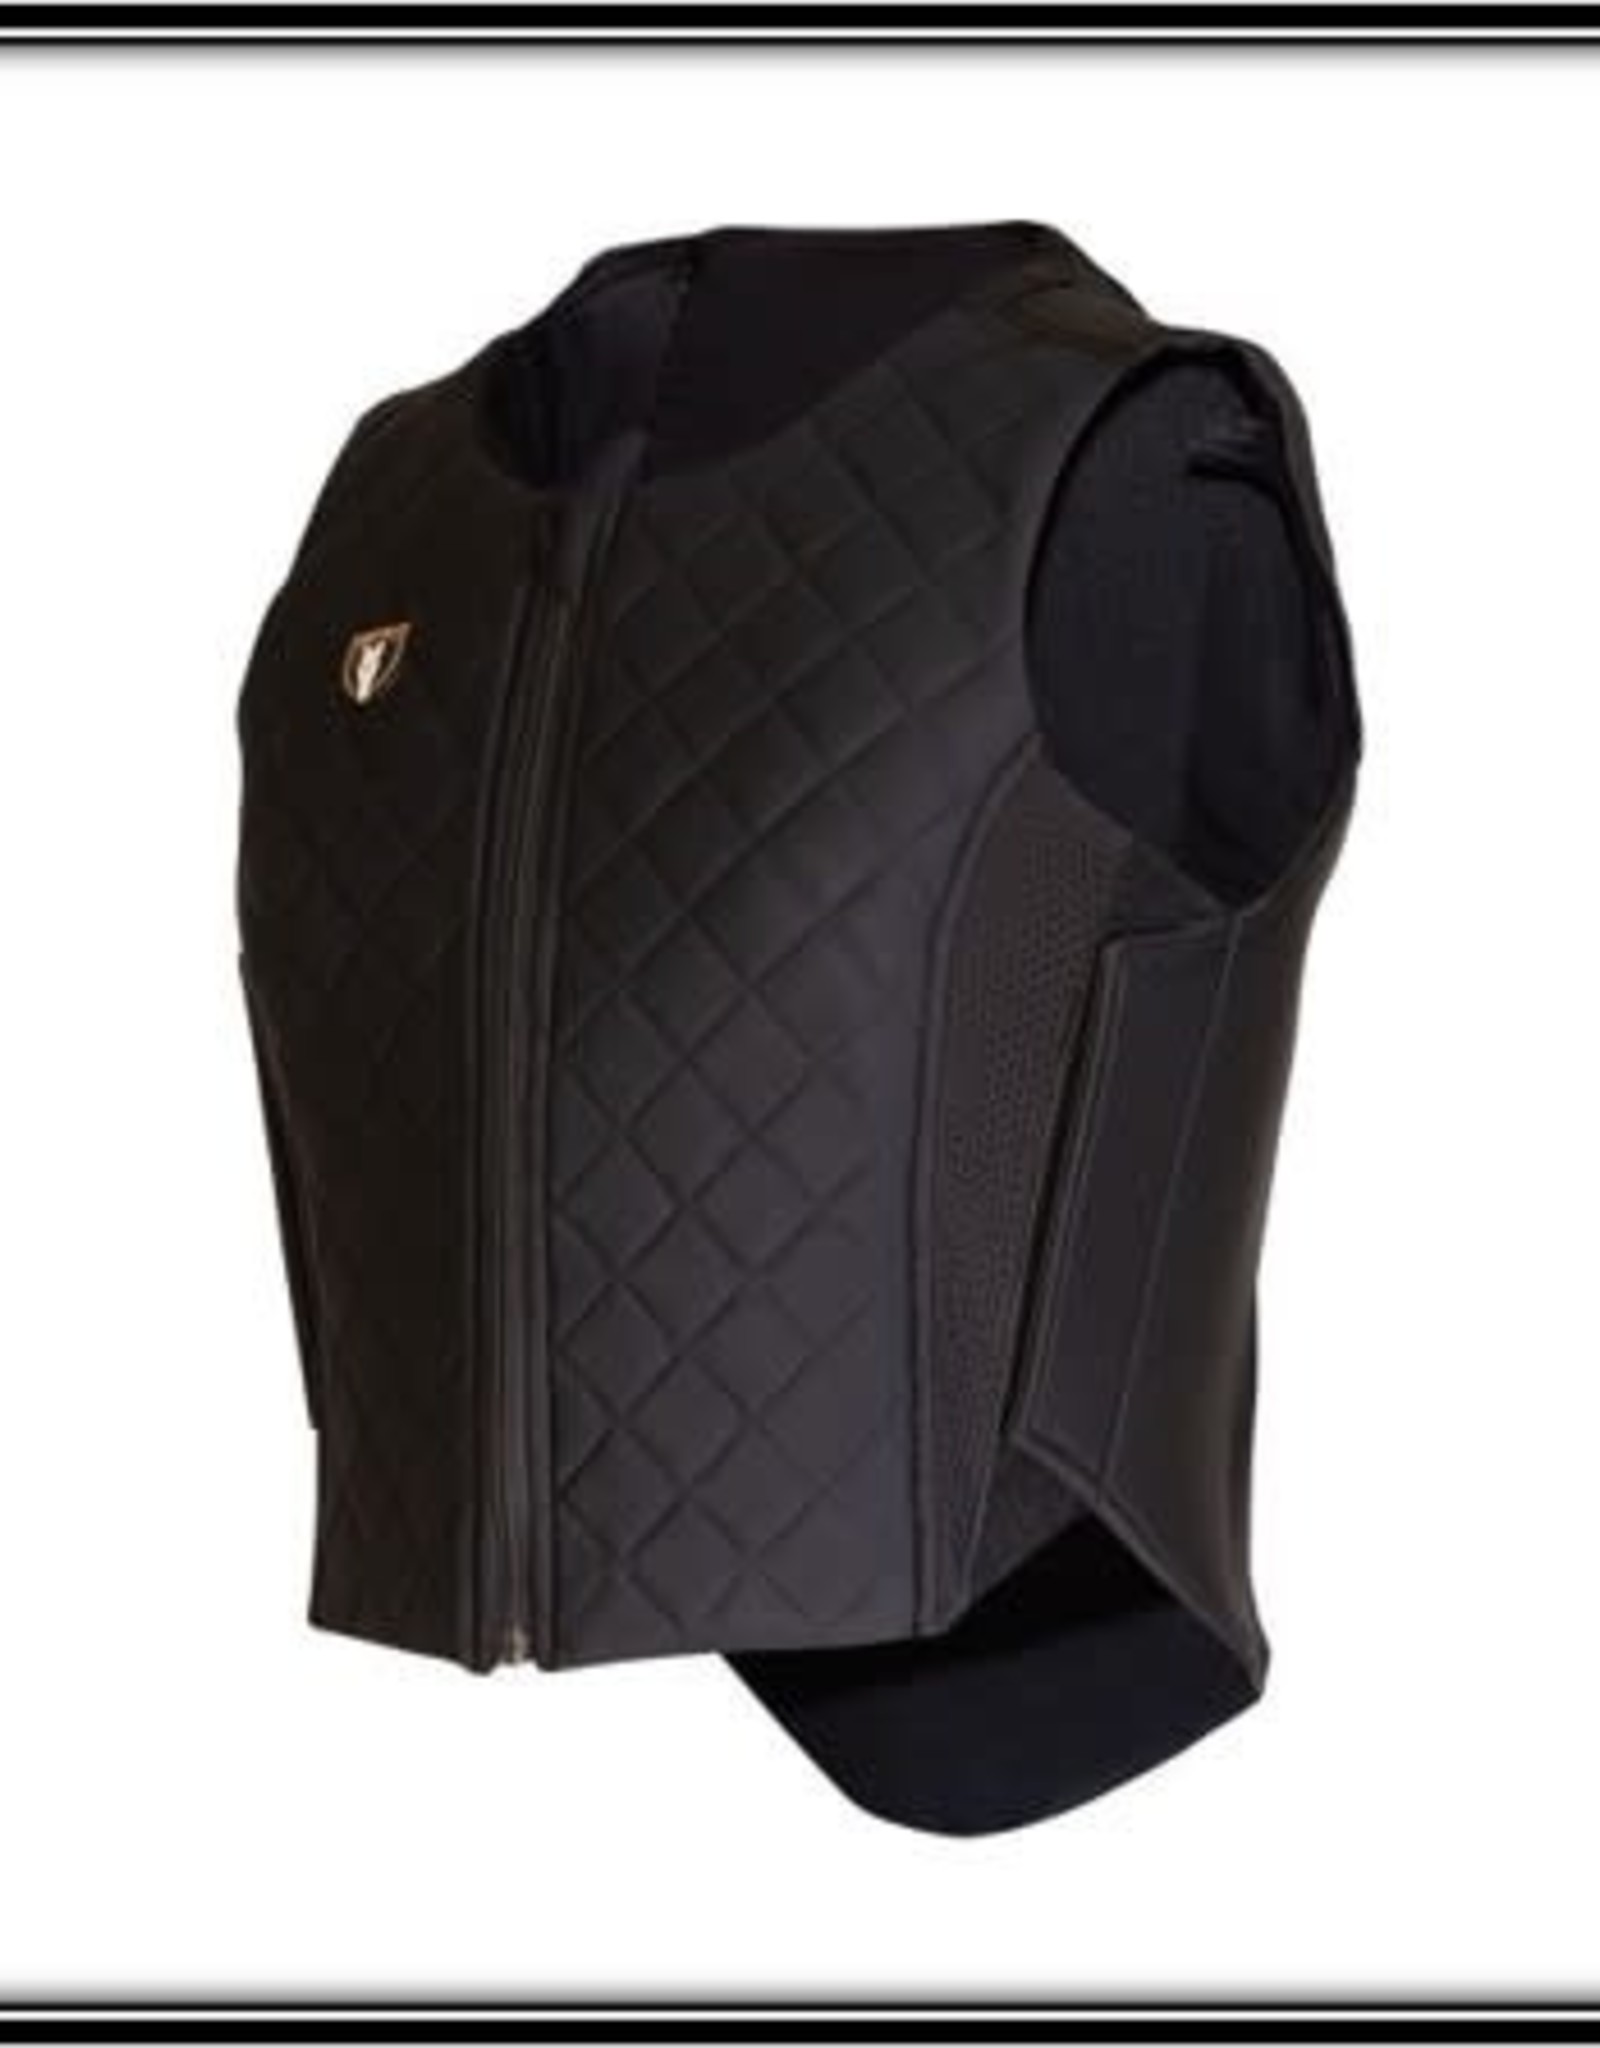 TIPPERARY YOUTH CONTOUR FLEX BACK PROTECTOR